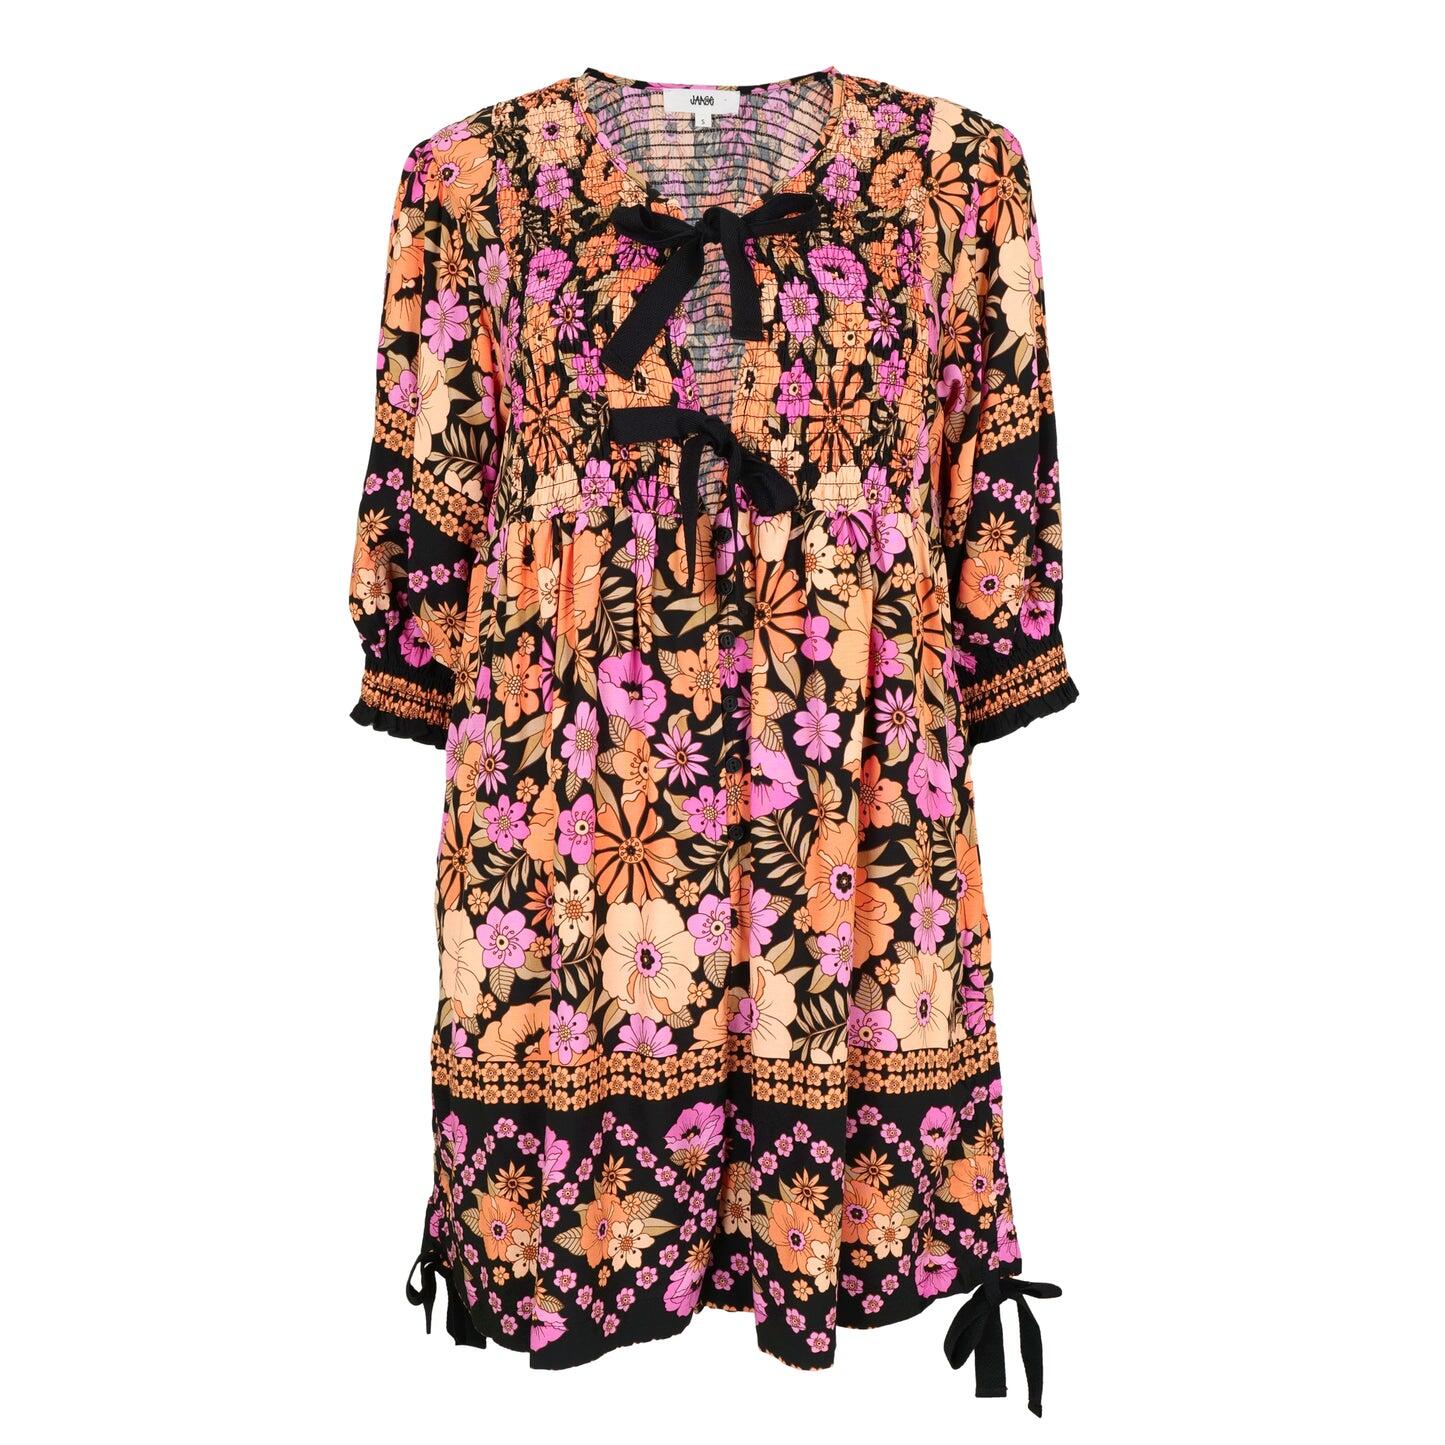 Apricot Blossom Print Roses Playsuit